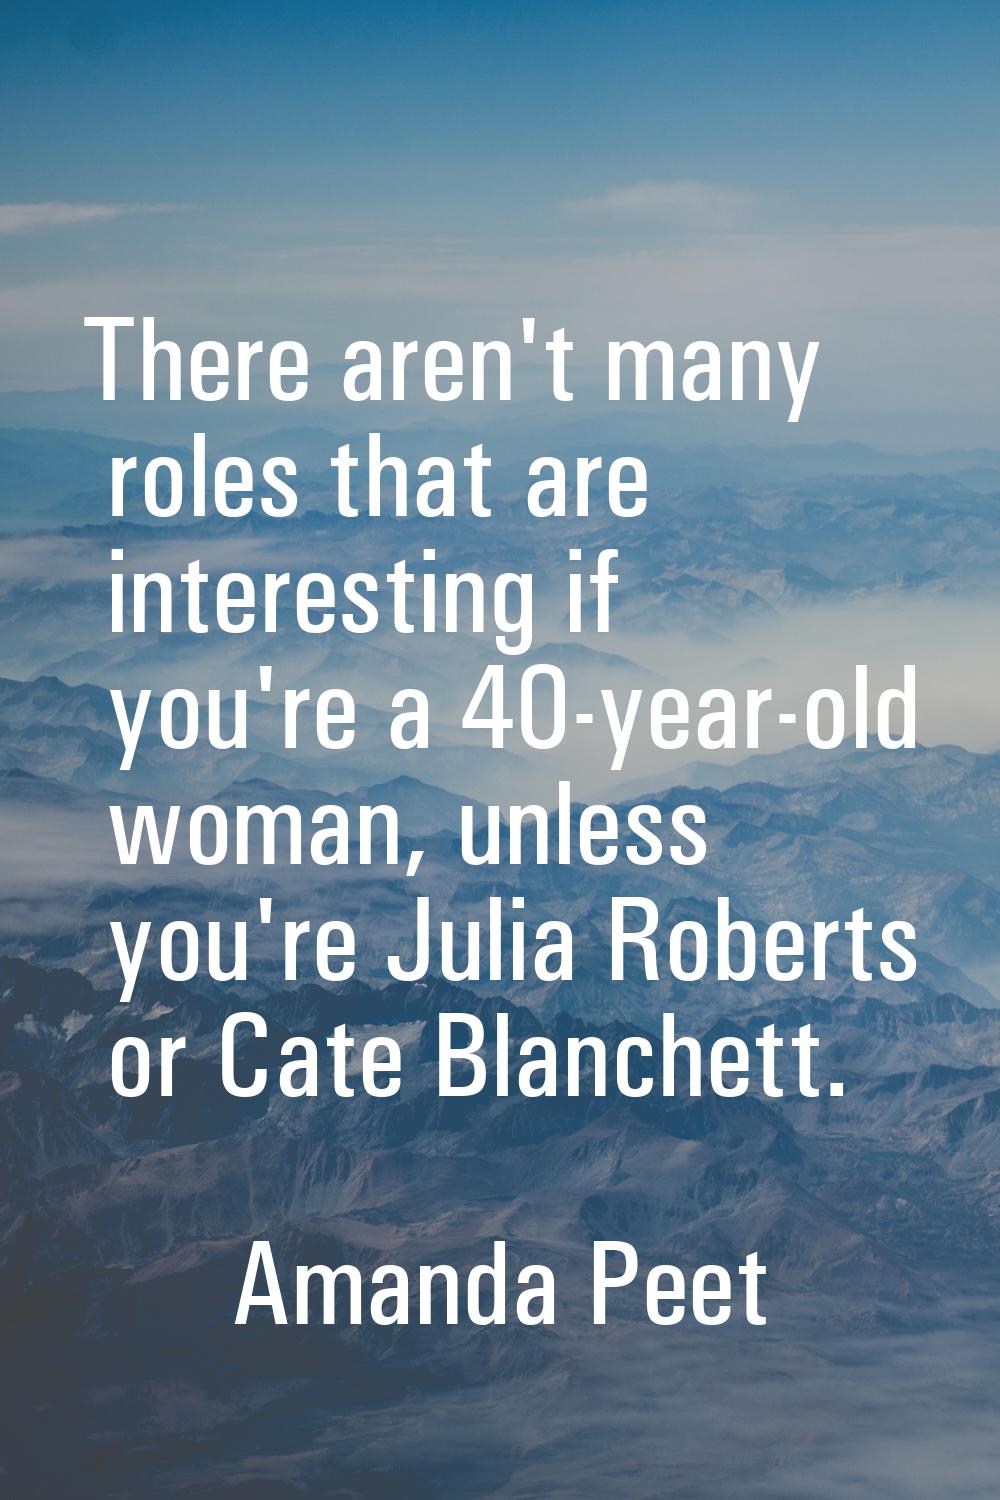 There aren't many roles that are interesting if you're a 40-year-old woman, unless you're Julia Rob